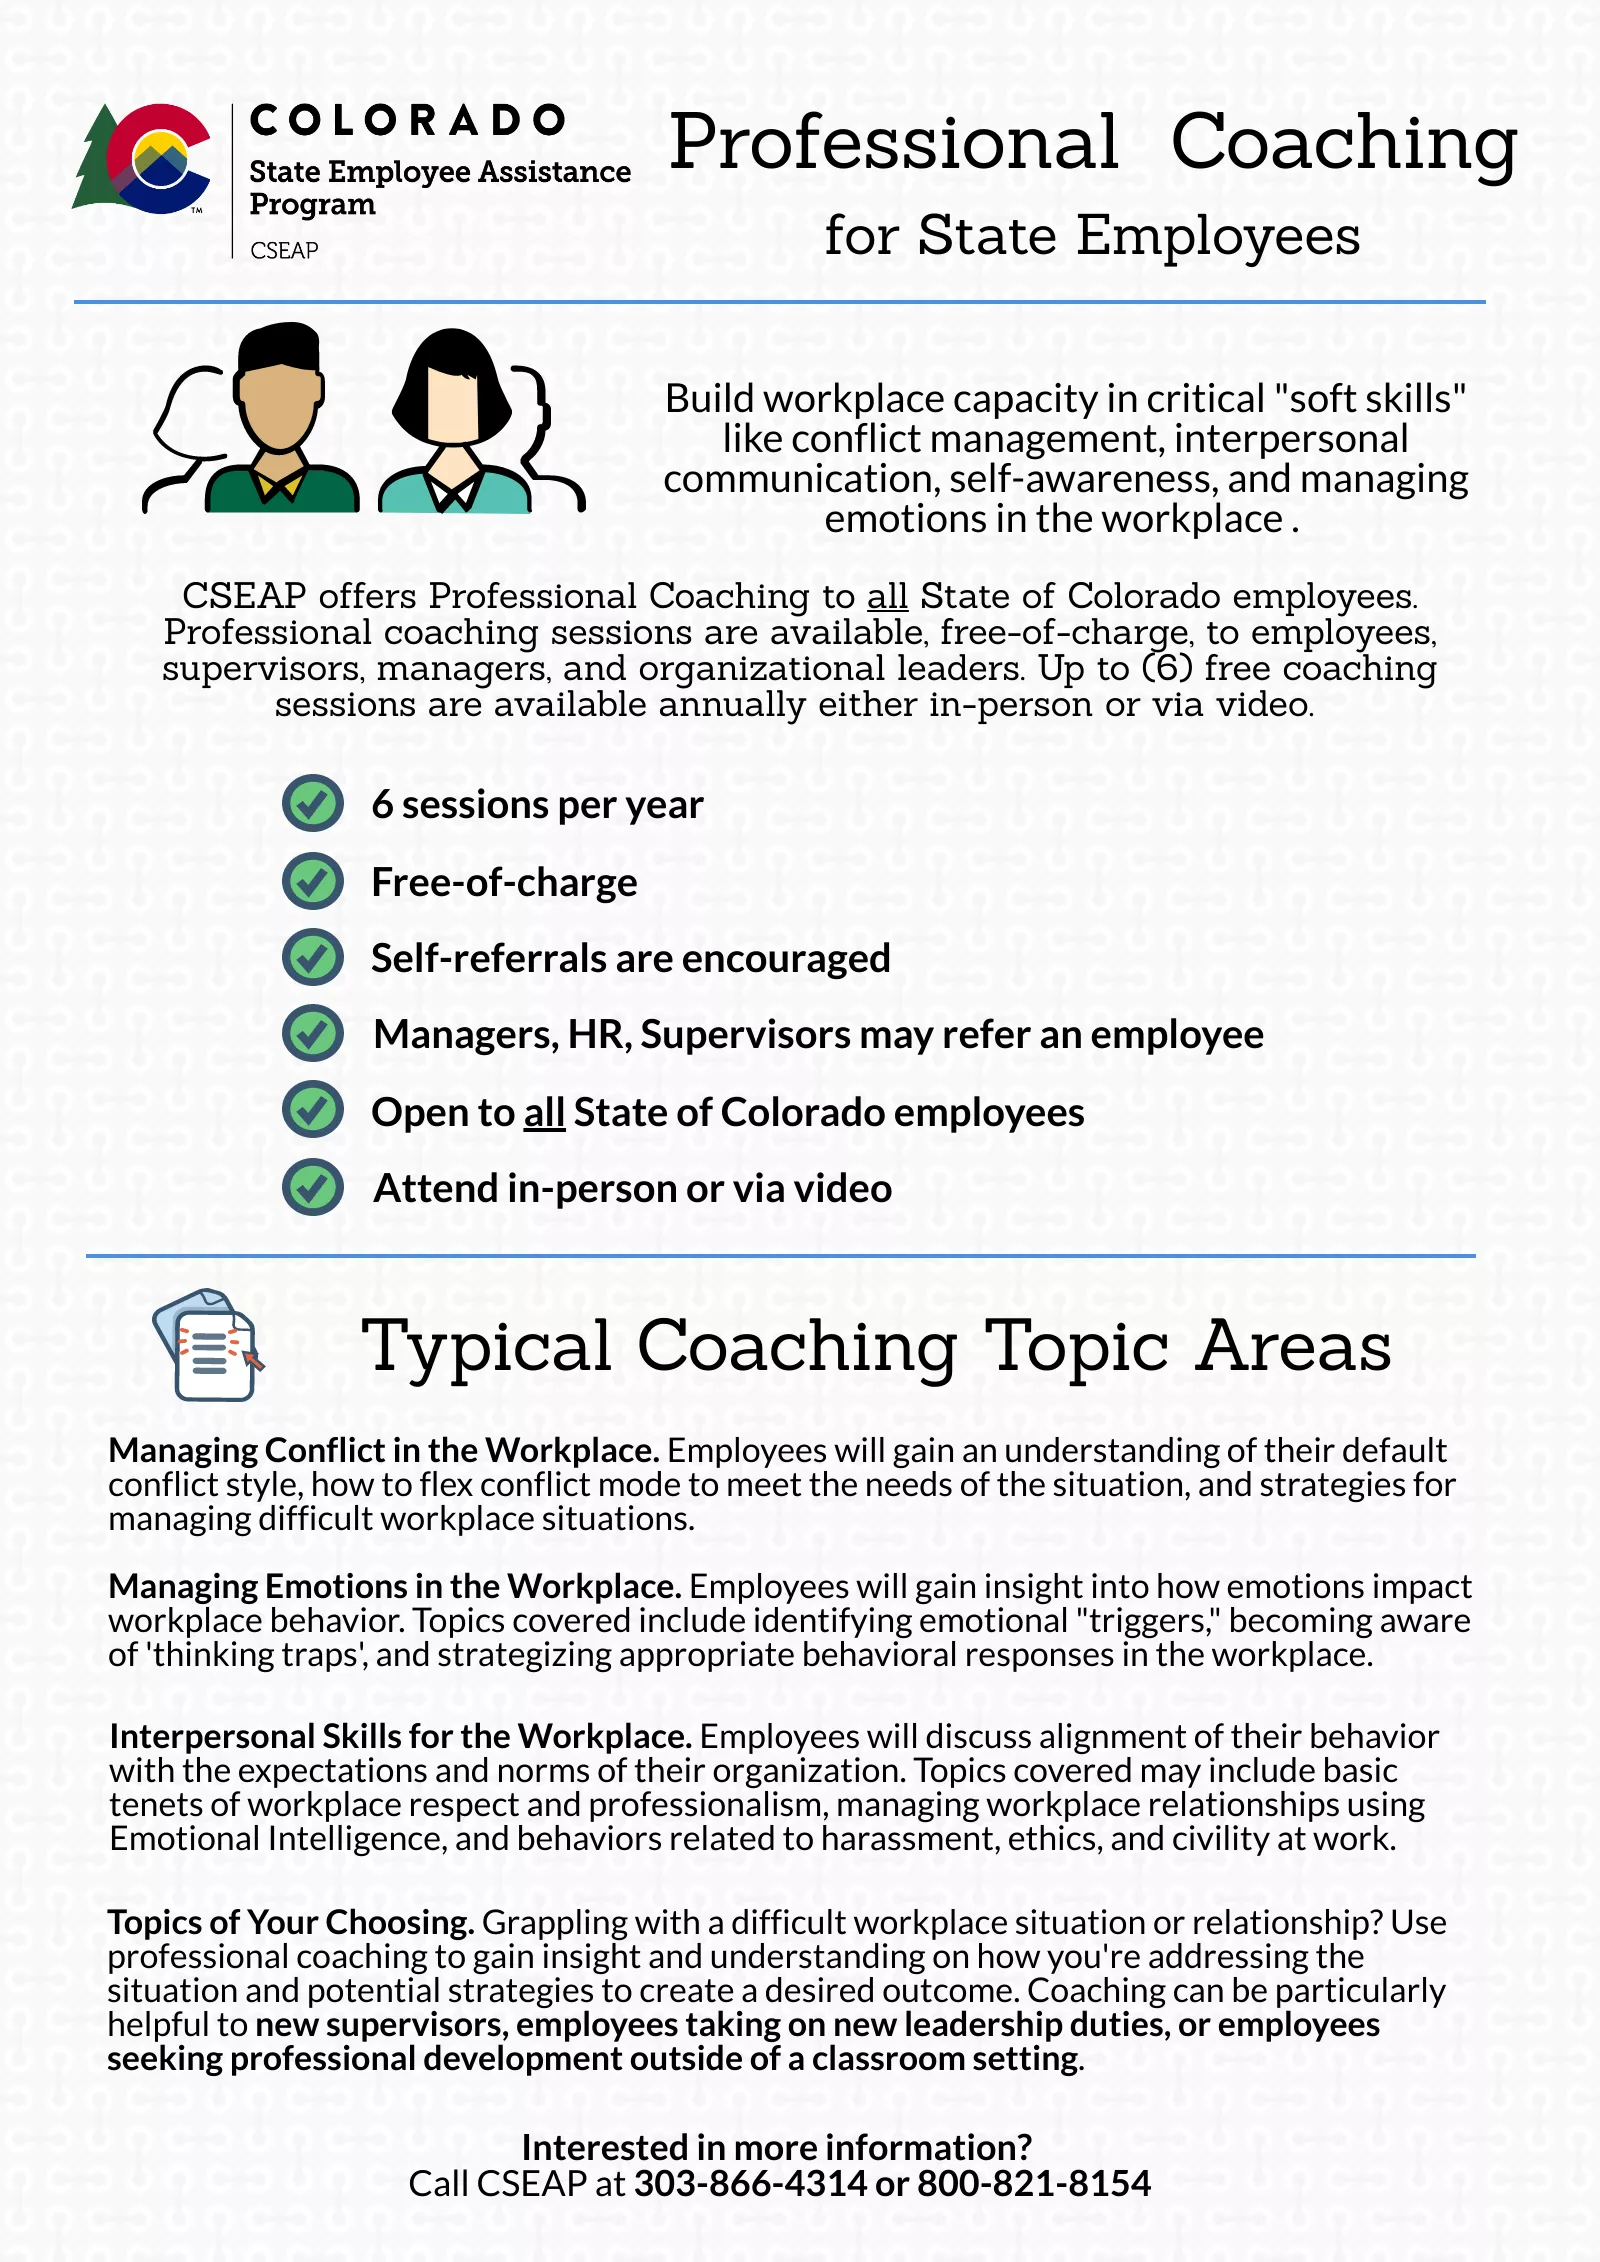 Professional Coaching for State employees infographic